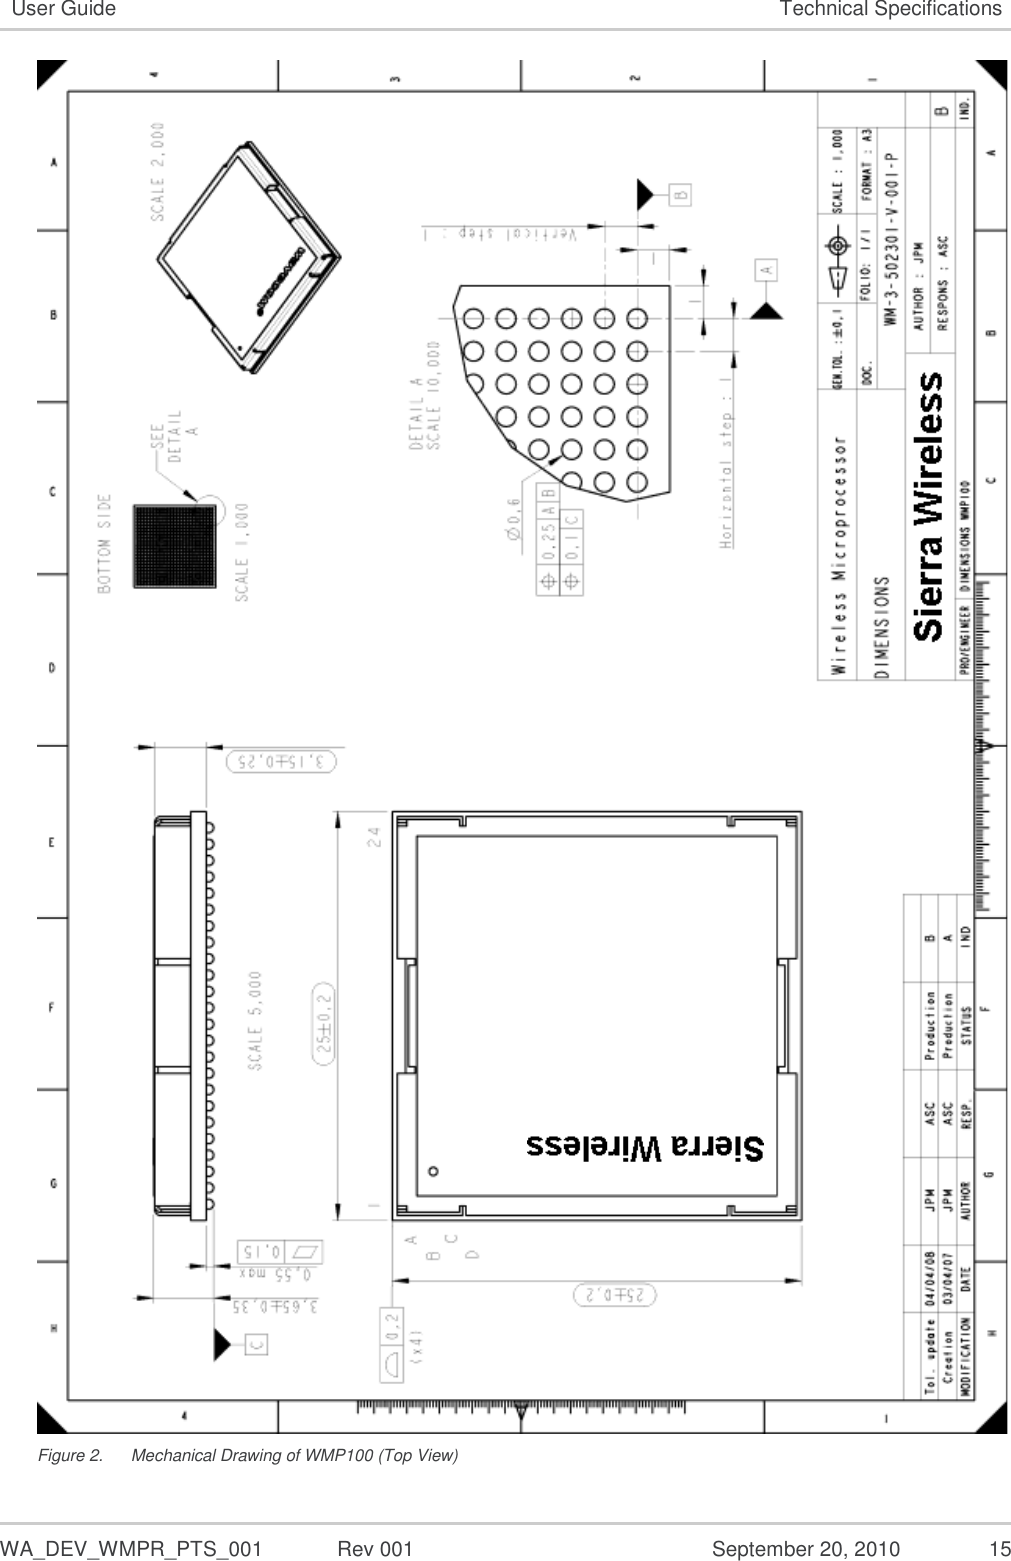   WA_DEV_WMPR_PTS_001  Rev 001  September 20, 2010  15 User Guide Technical Specifications  Figure 2.  Mechanical Drawing of WMP100 (Top View) 